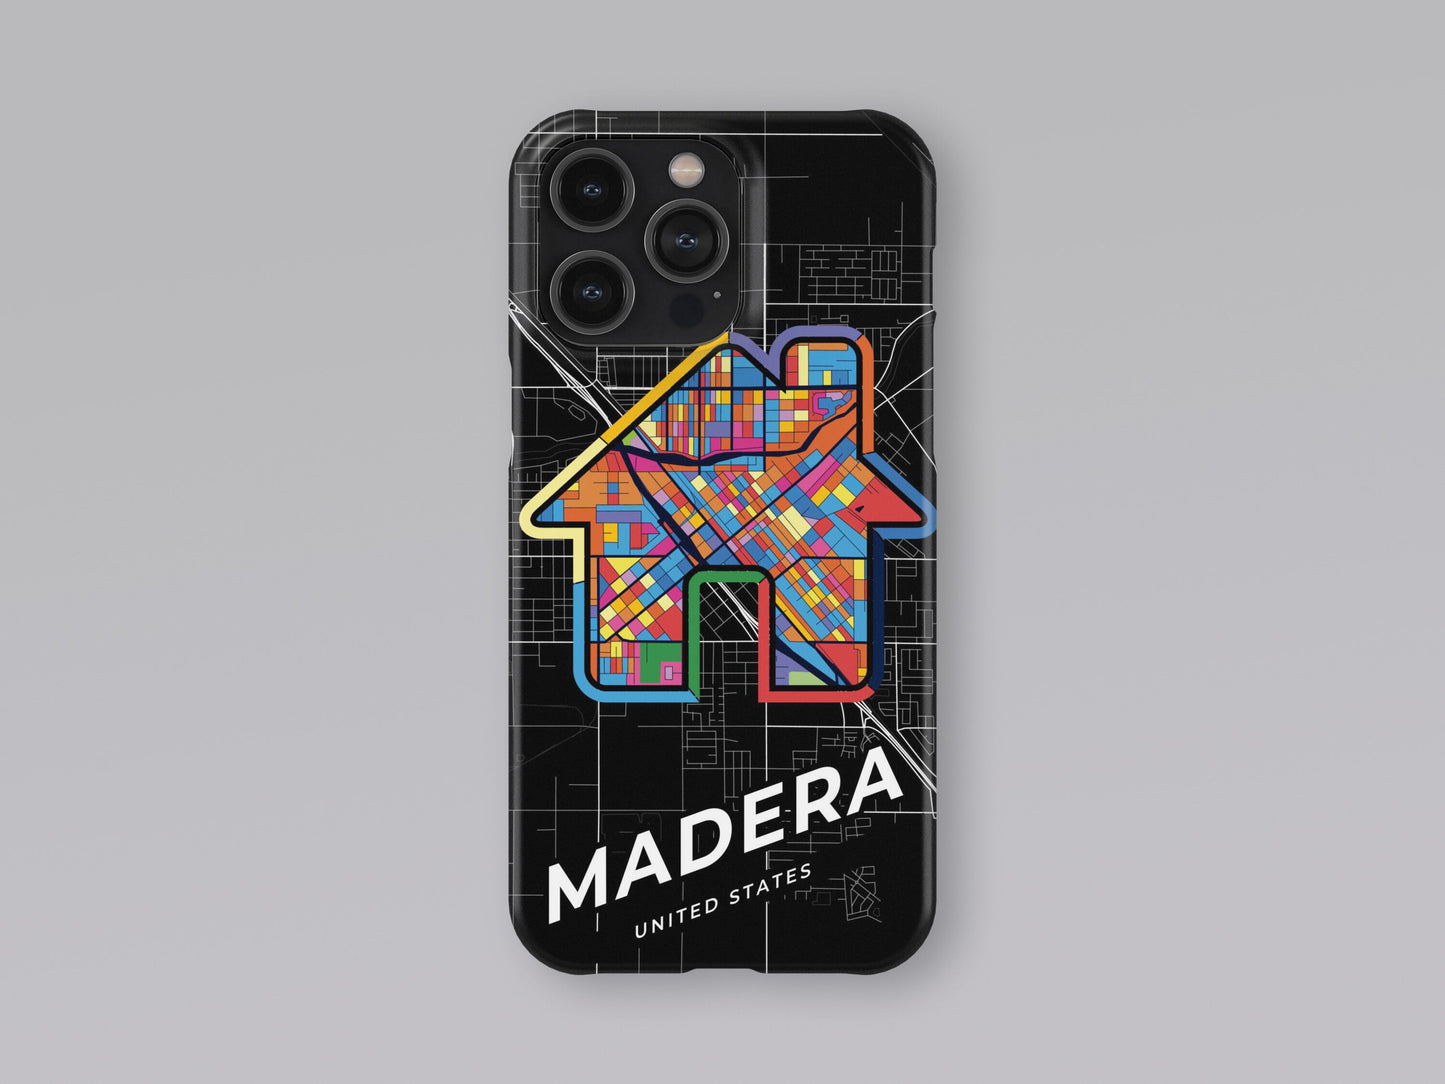 Madera California slim phone case with colorful icon. Birthday, wedding or housewarming gift. Couple match cases. 3